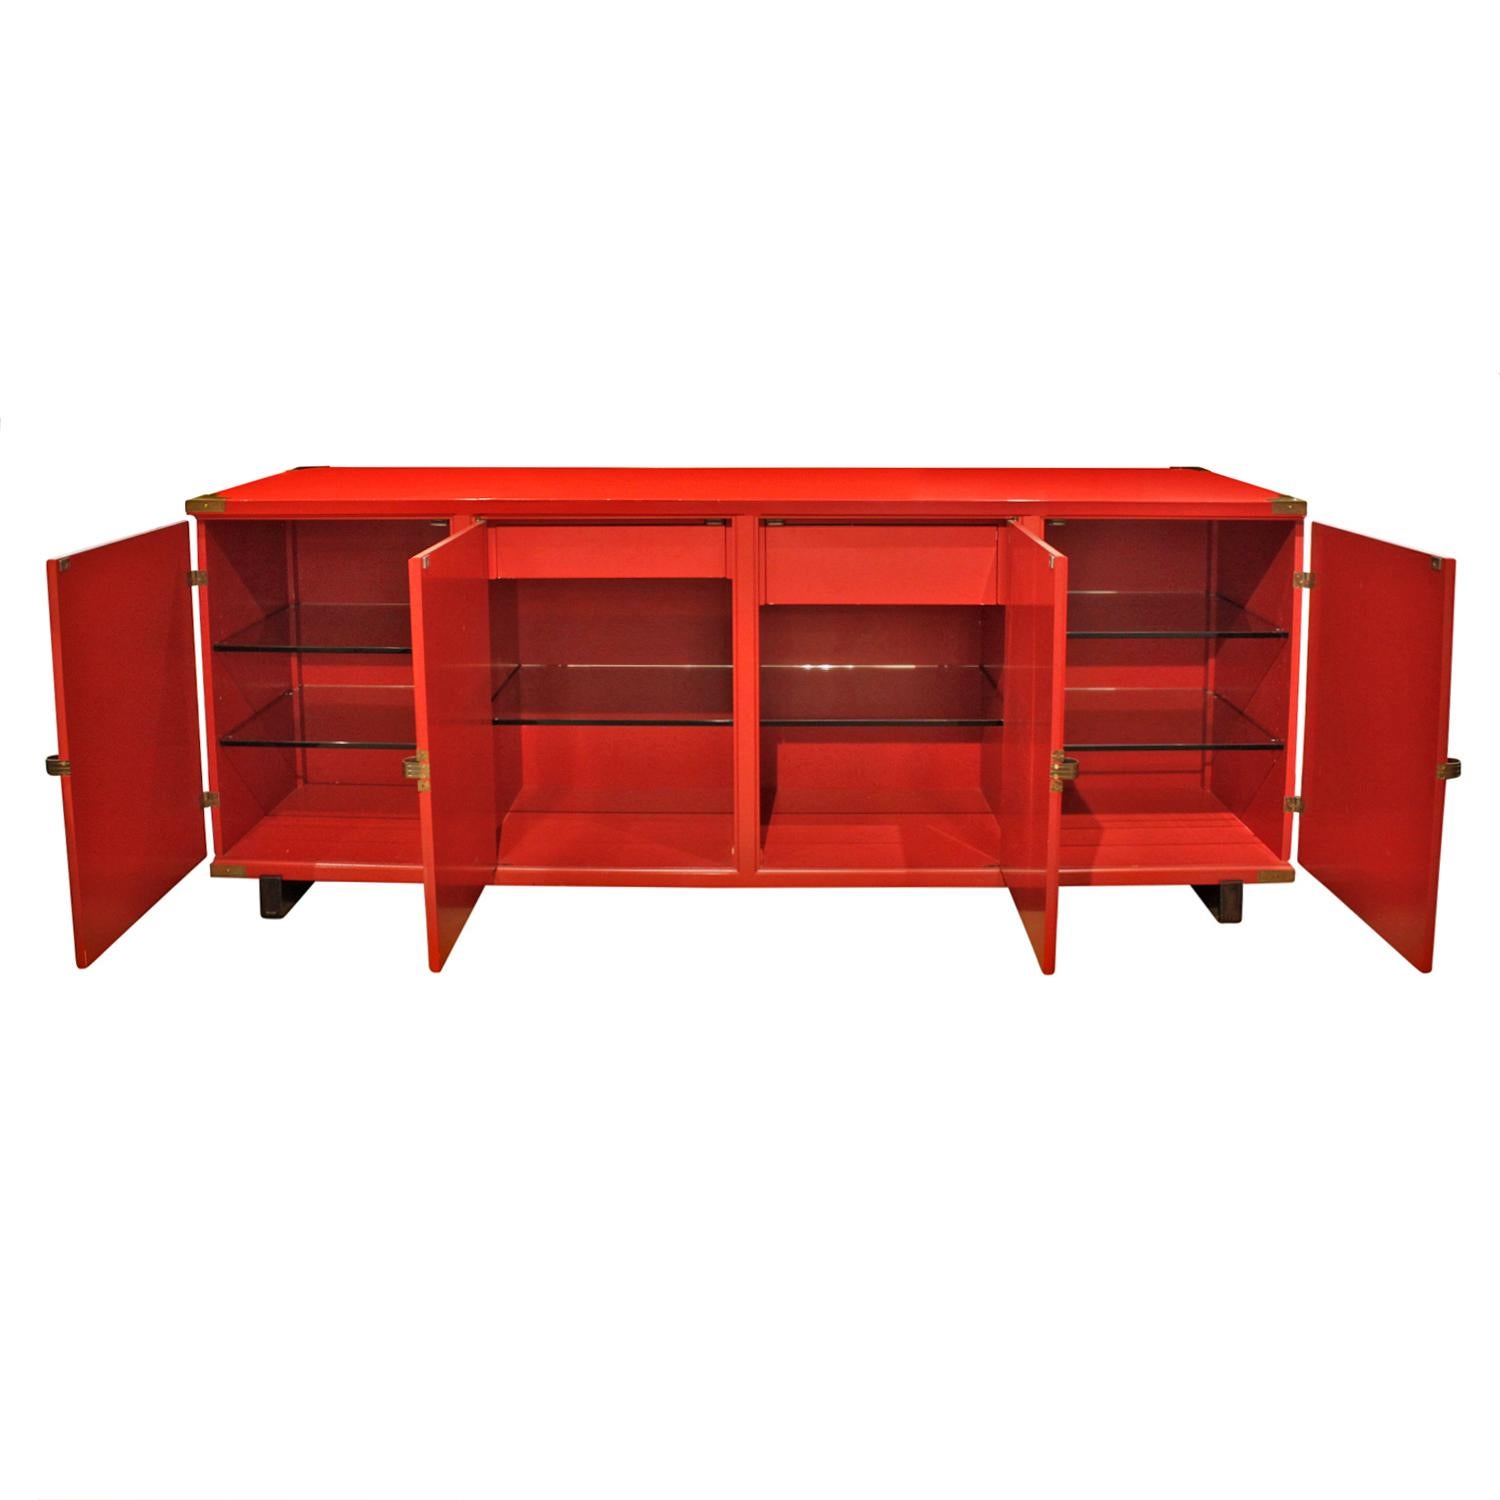 Mid-20th Century Tommi Parzinger 4 Door Chinese Red Cabinet With Iconic Hardware 1950s